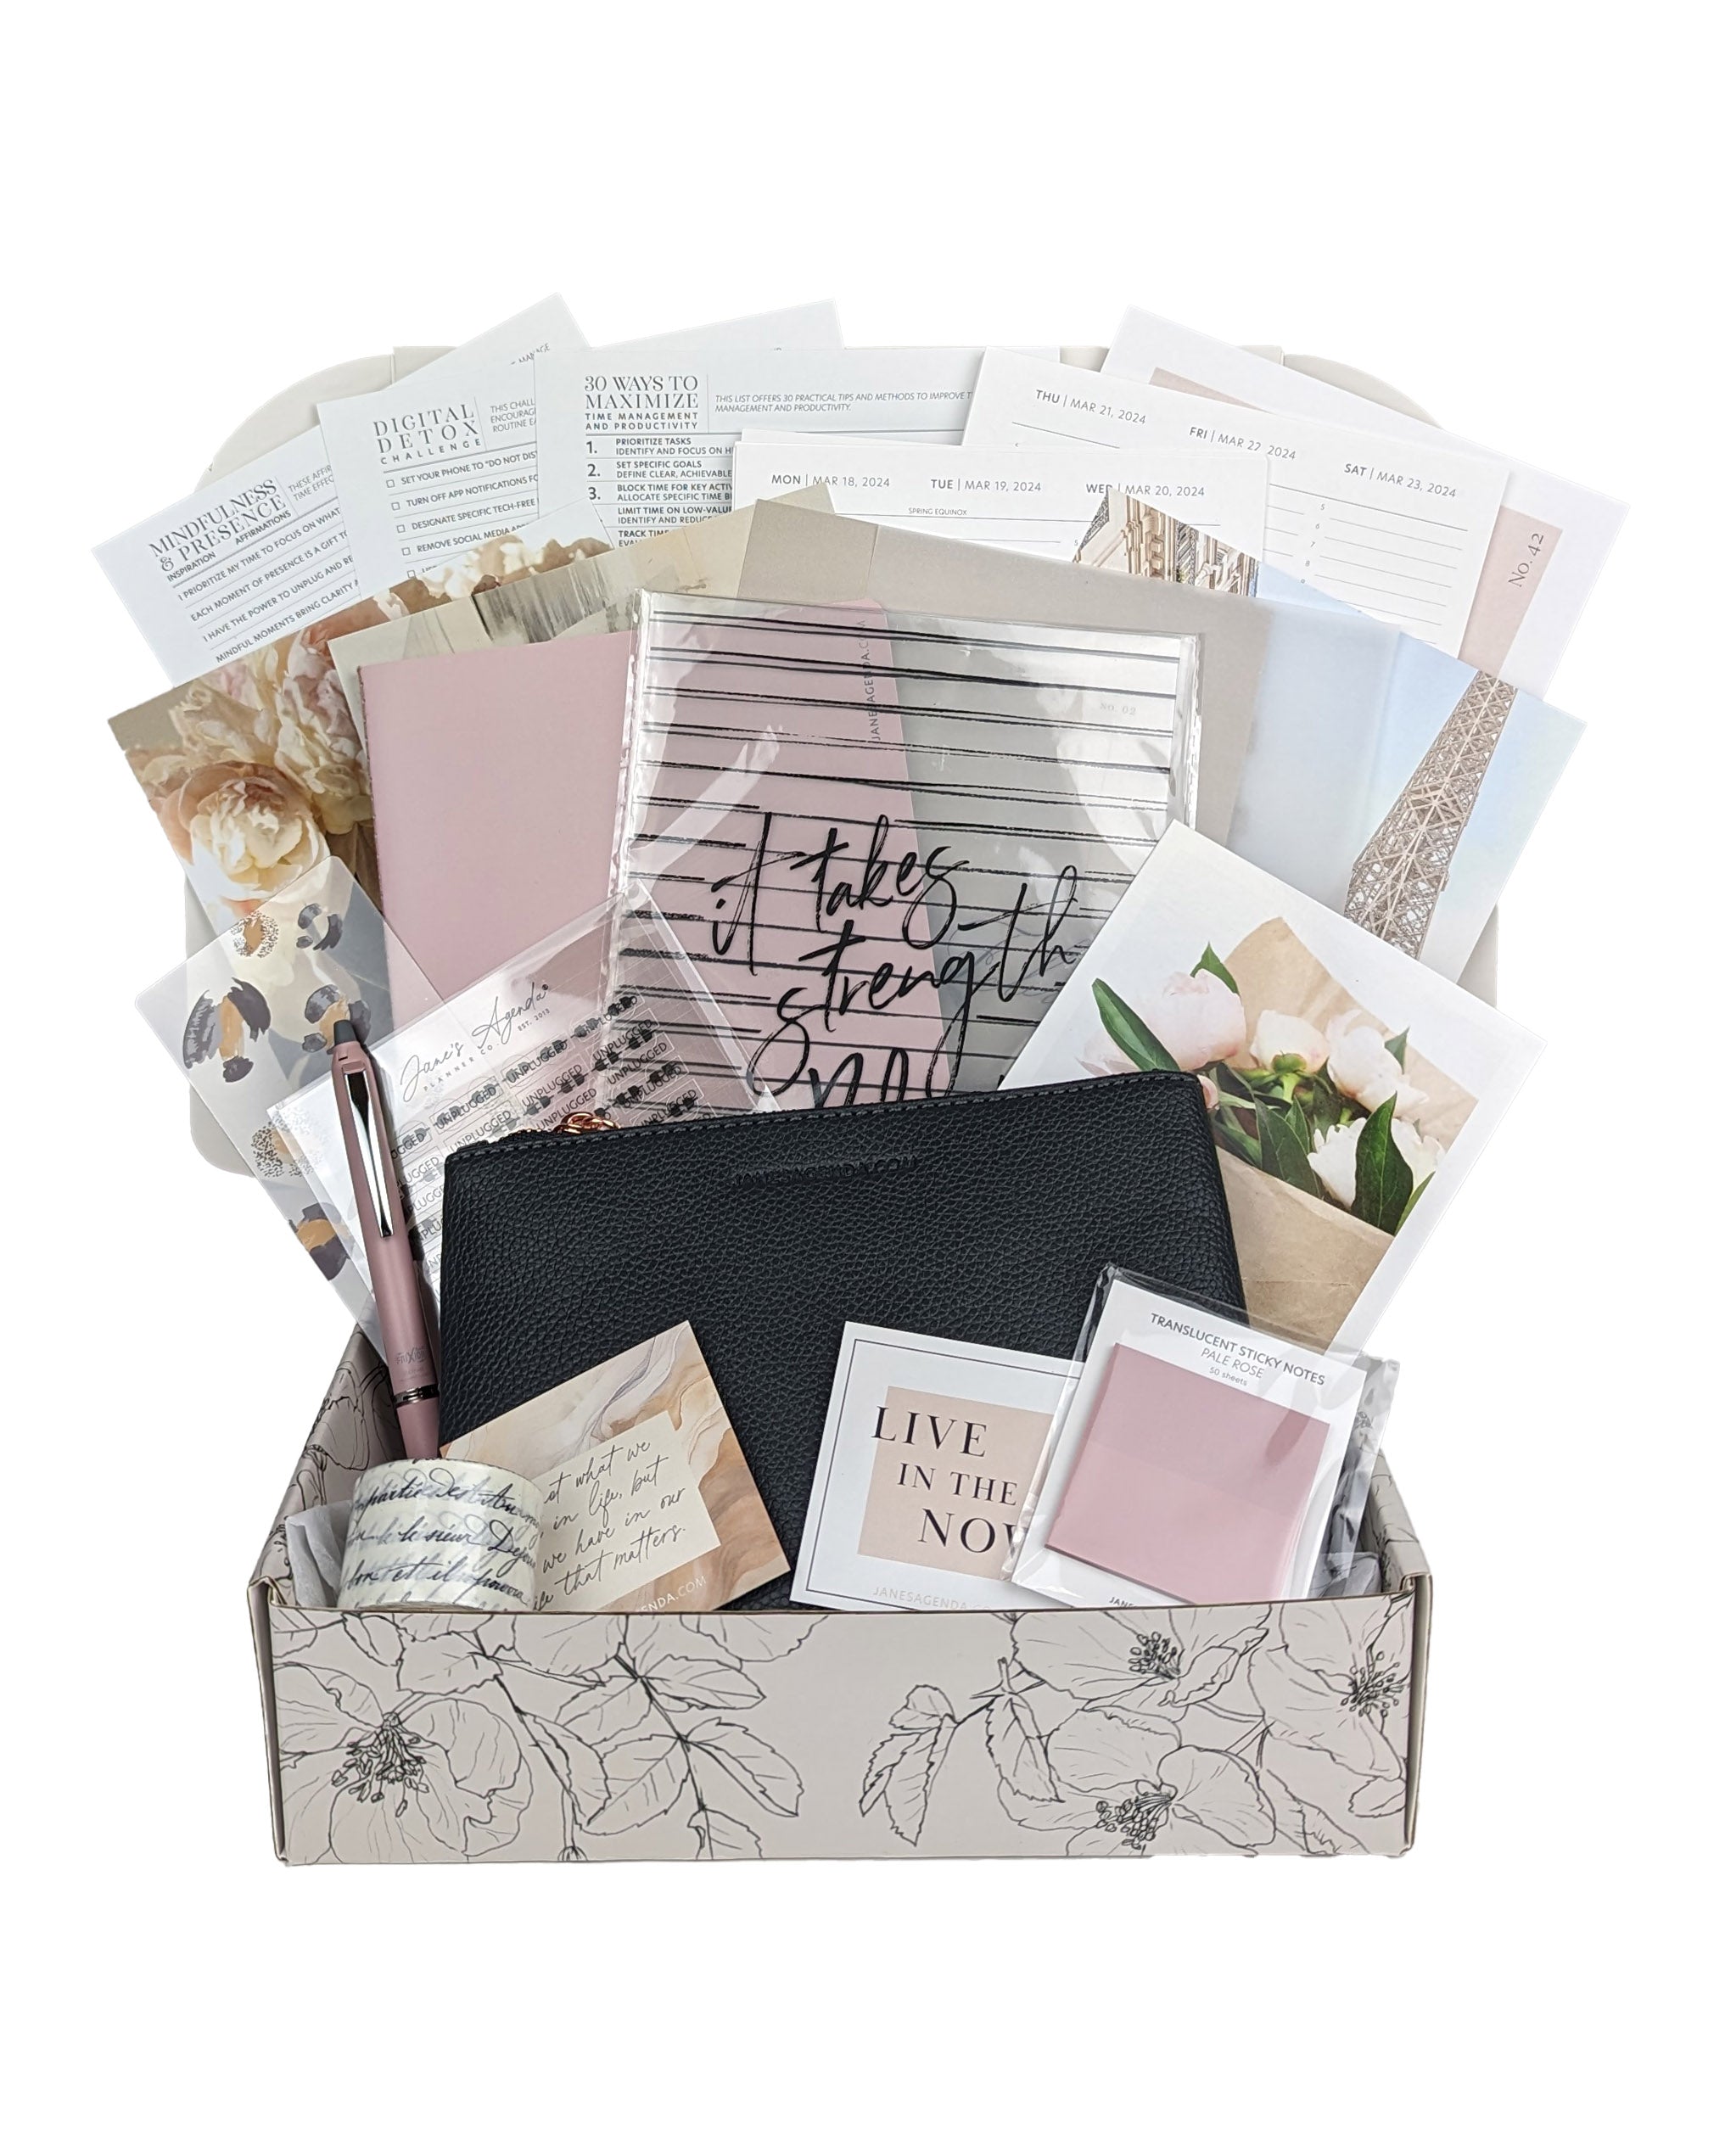 Deluxe Planner Lifestyle Subscription Box by Jane's Agenda.